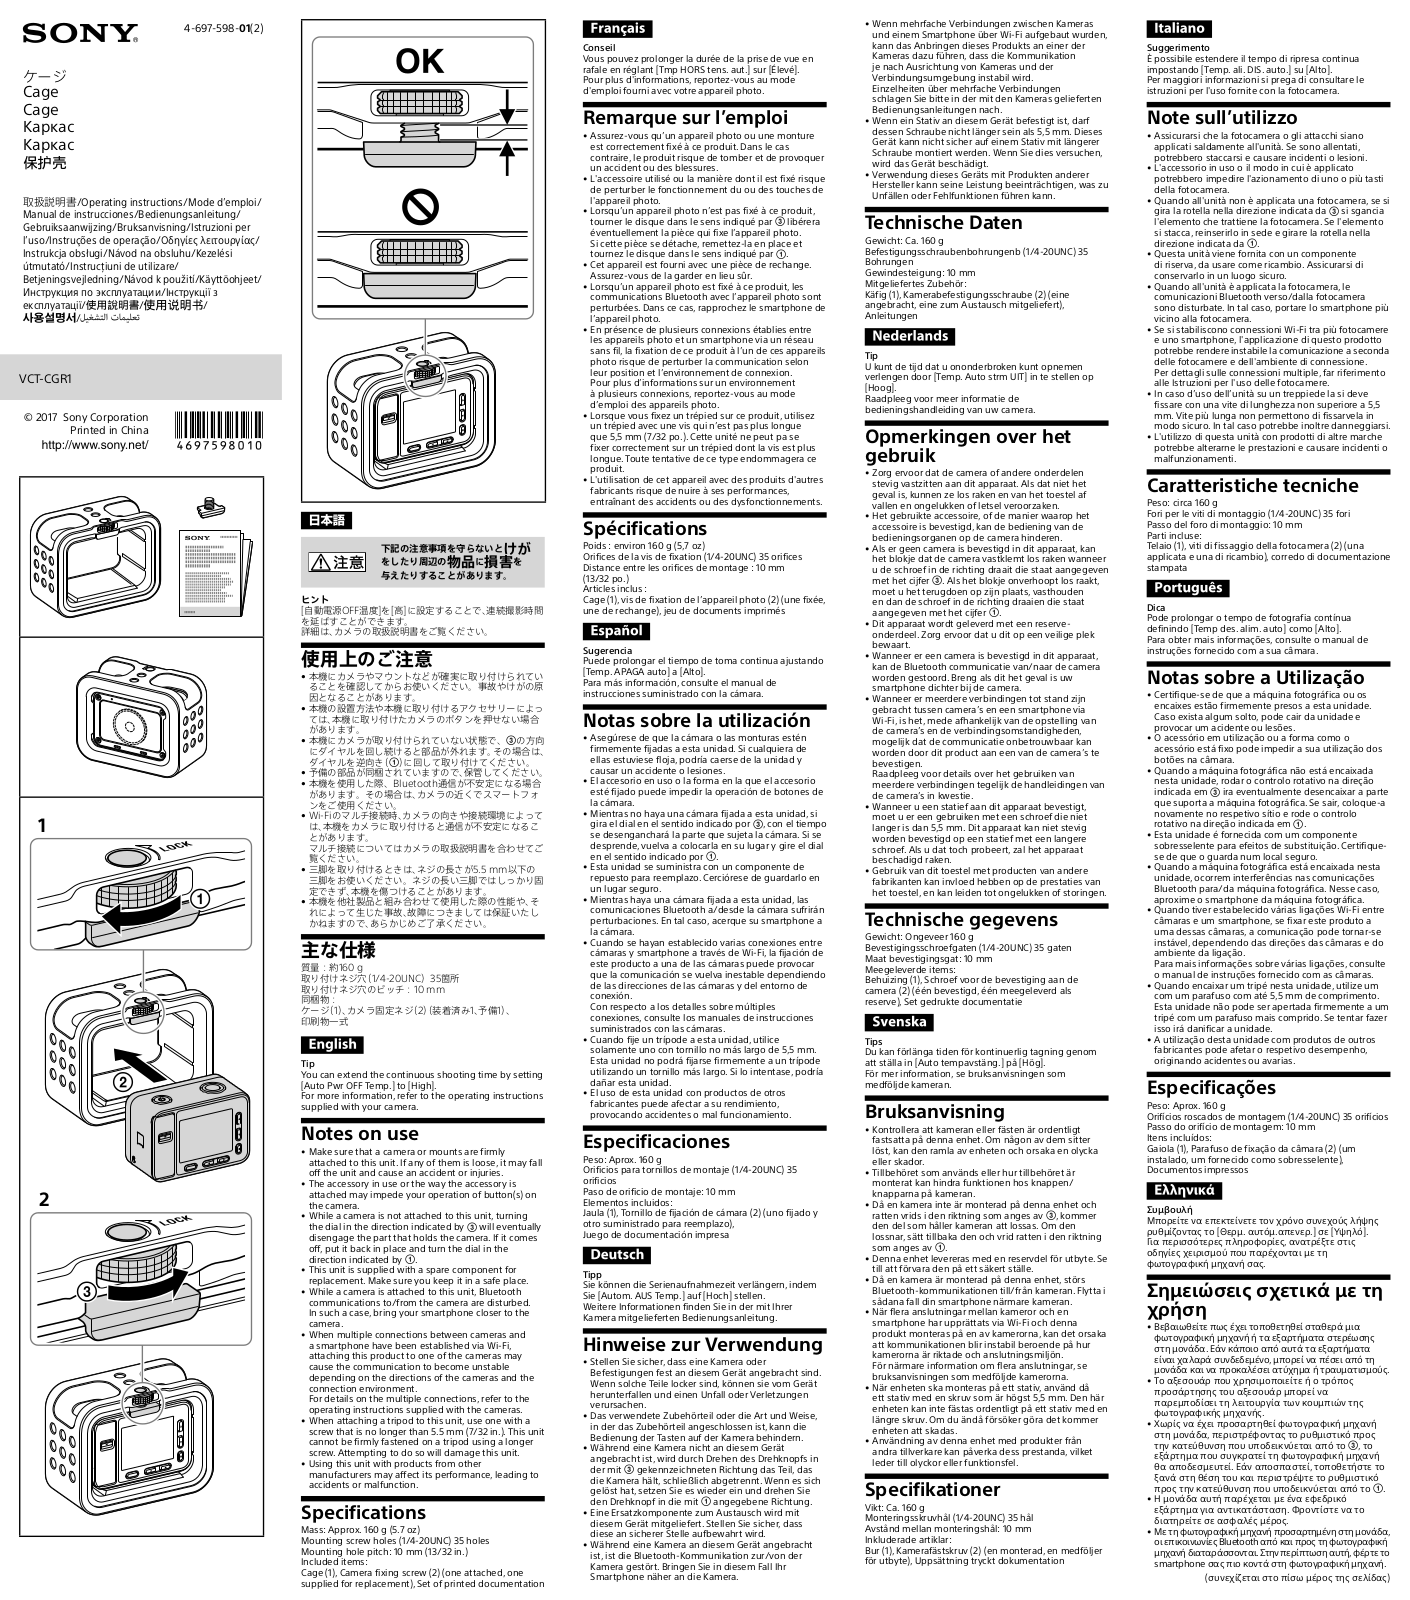 SONY VCT-CGR1 User Manual